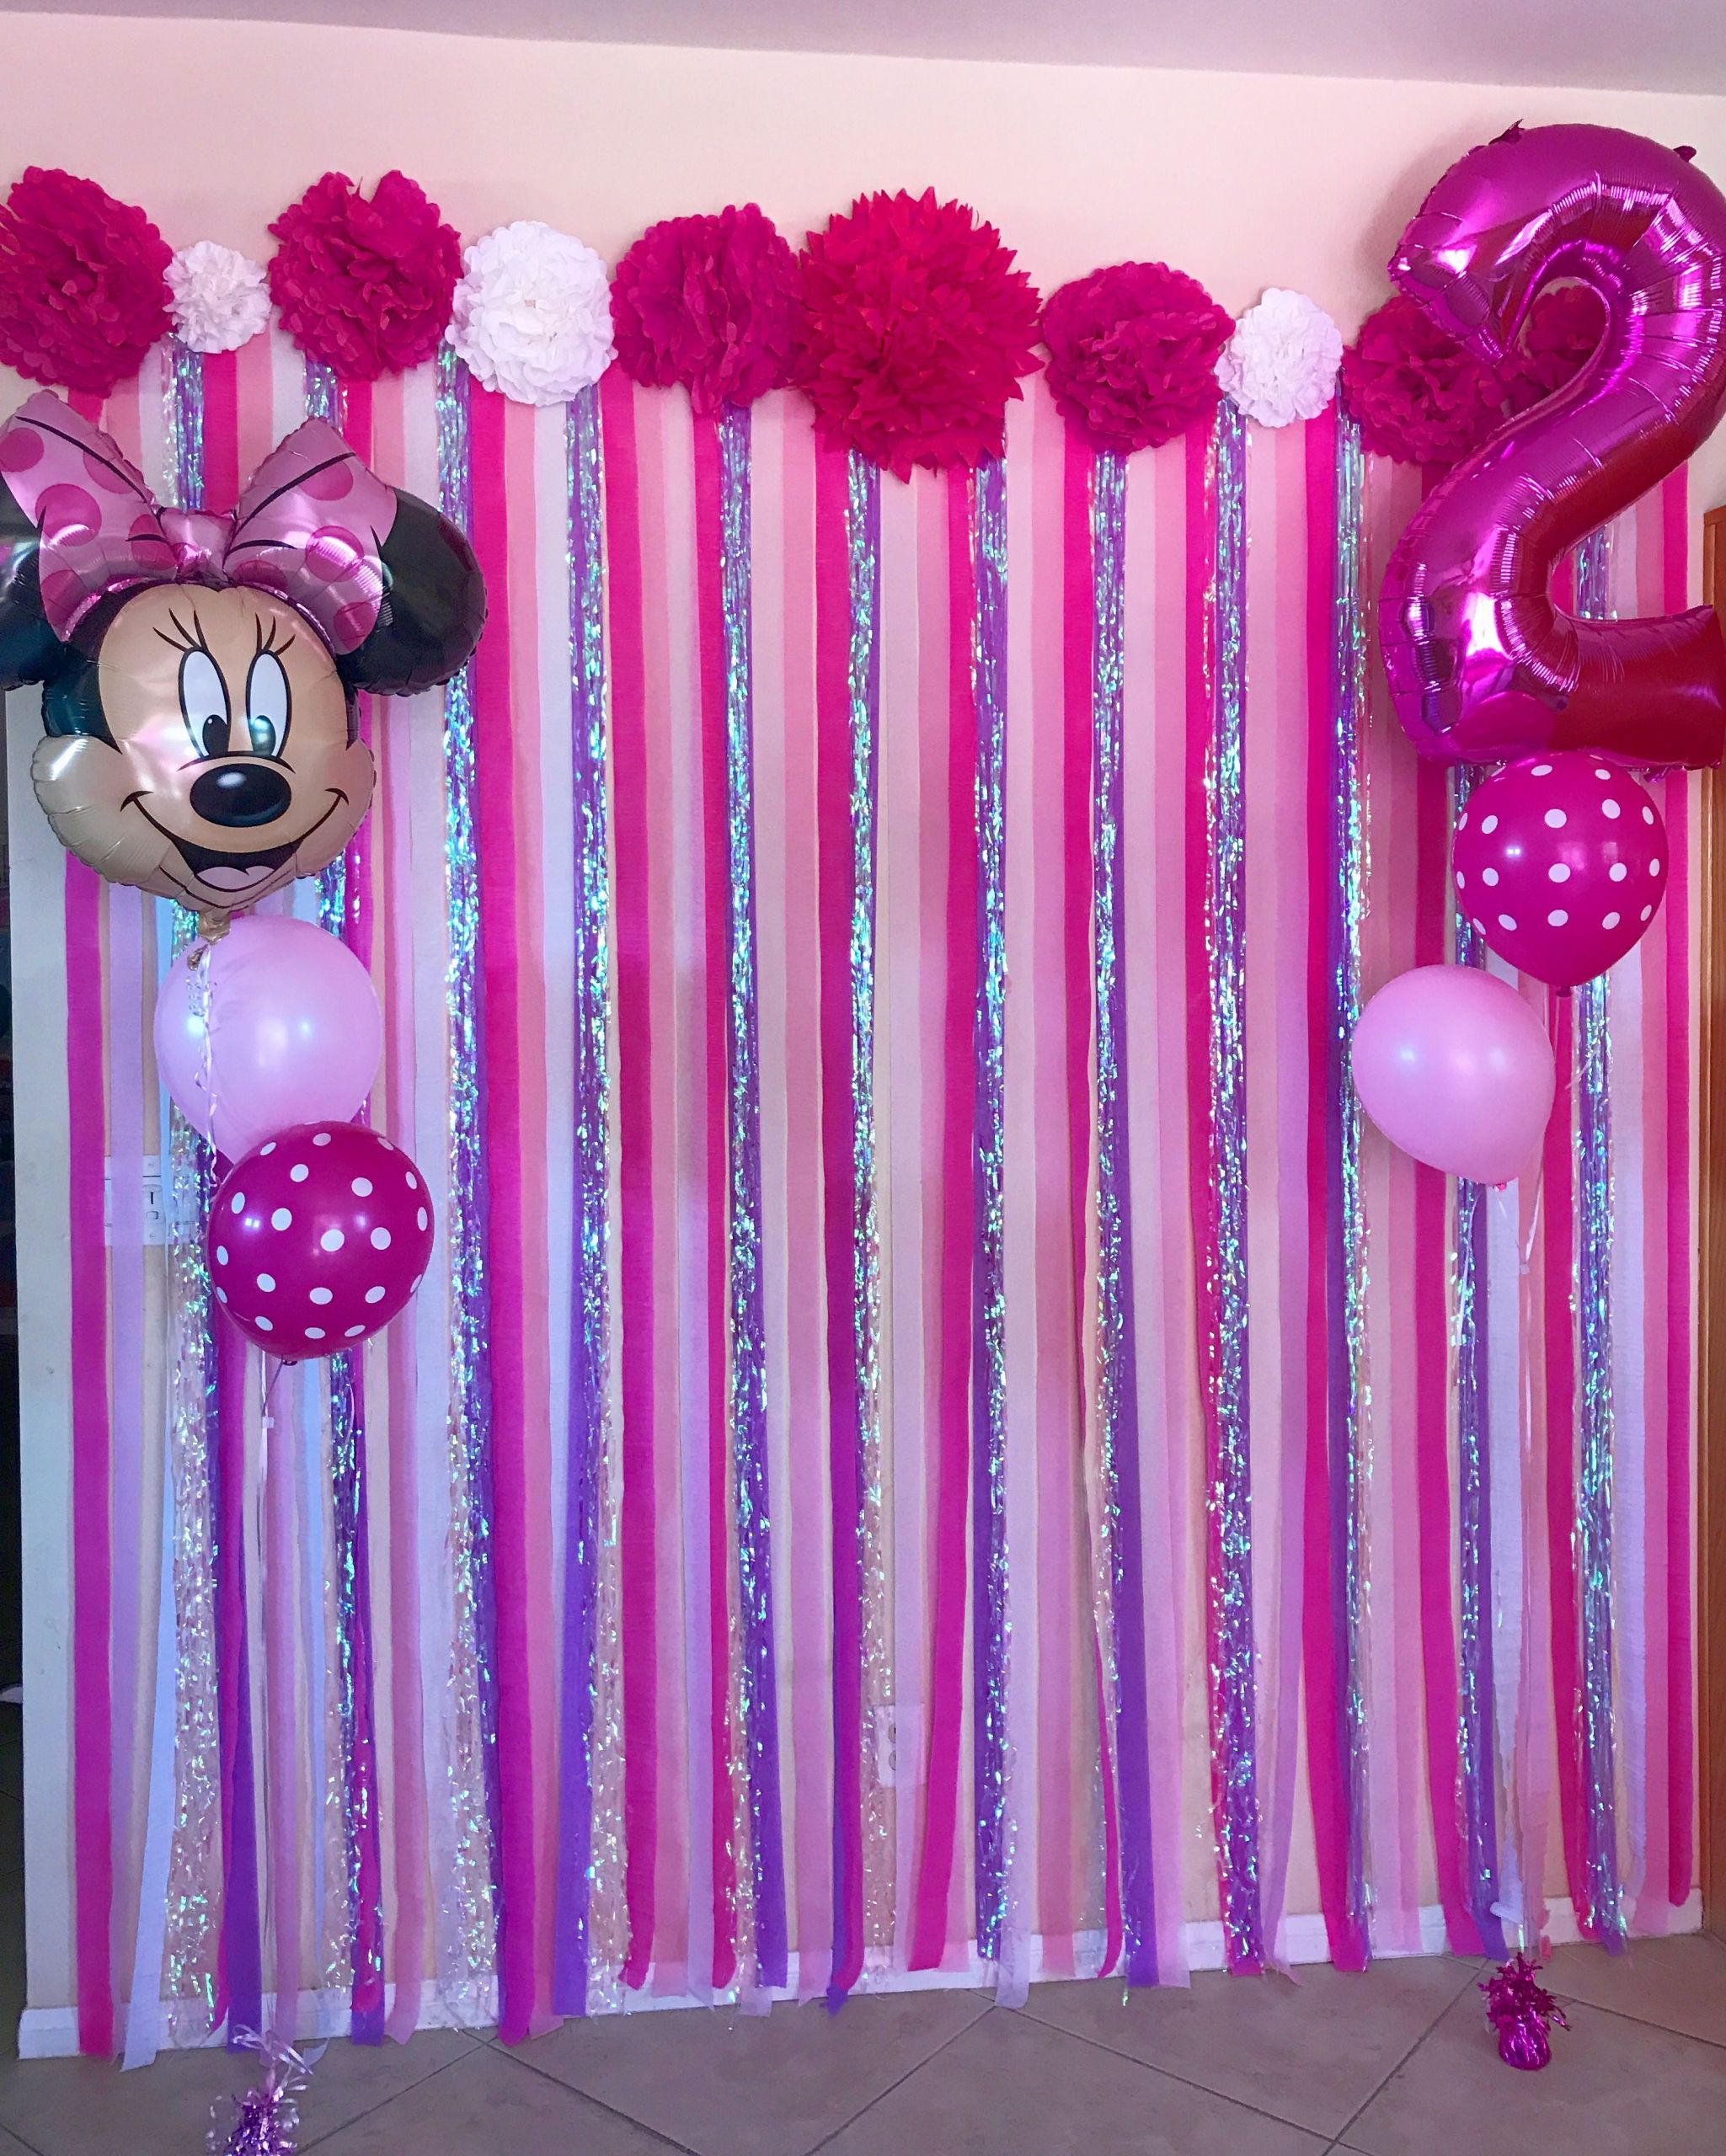 Diy Minnie Mouse Birthday Decorations
 DIY Minnie Mouse themed photo streamer wall in 2019